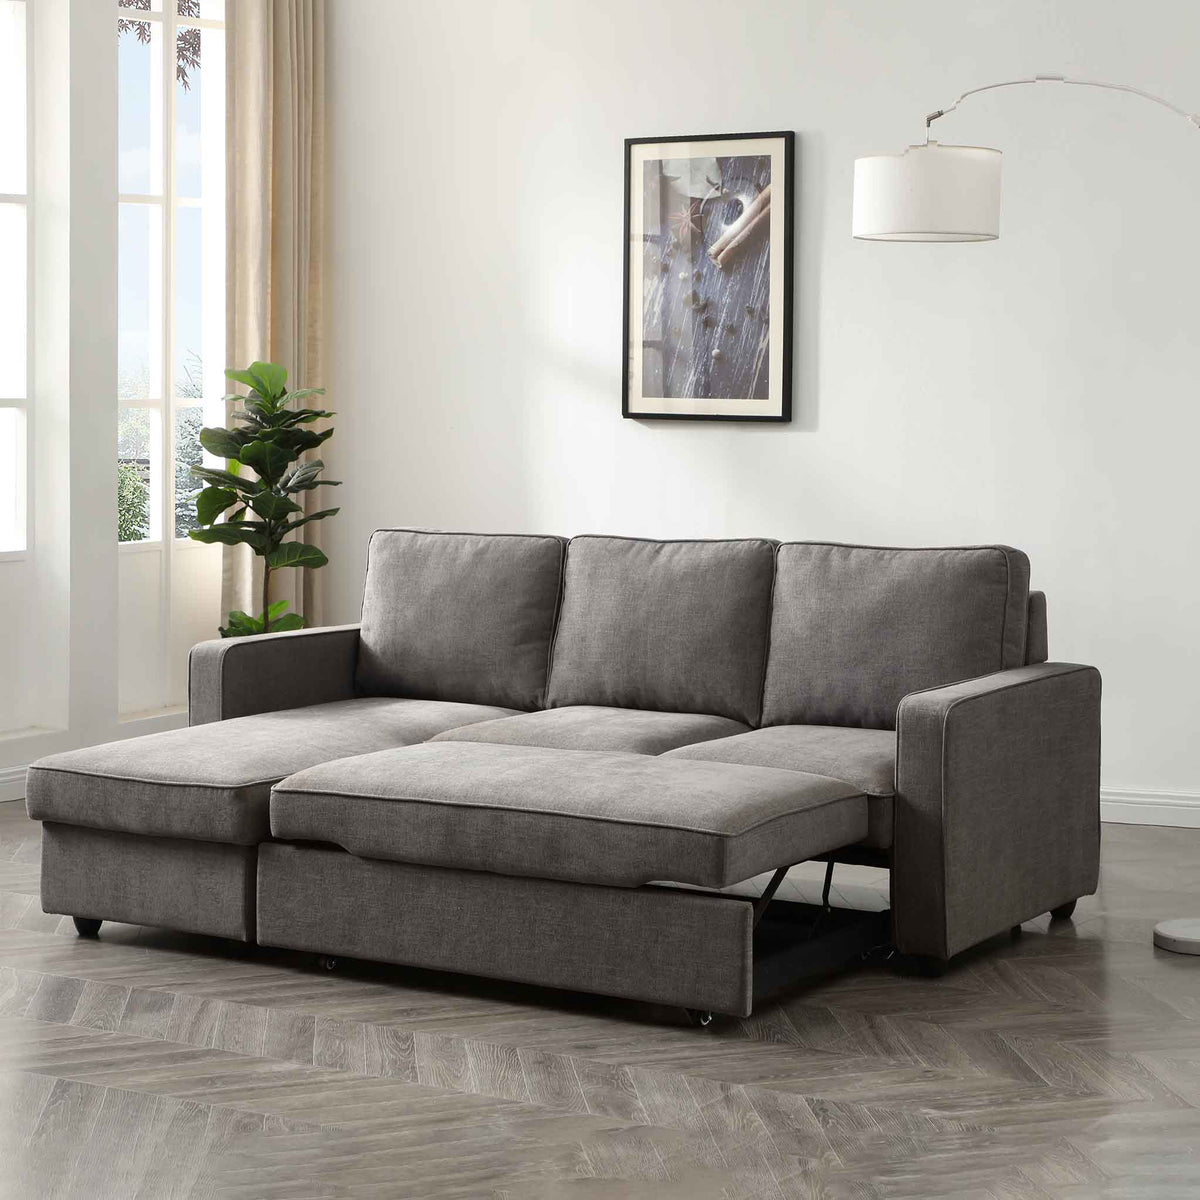 Soldier Grey 3 Seater Corner Sofa Bed lifestyle image